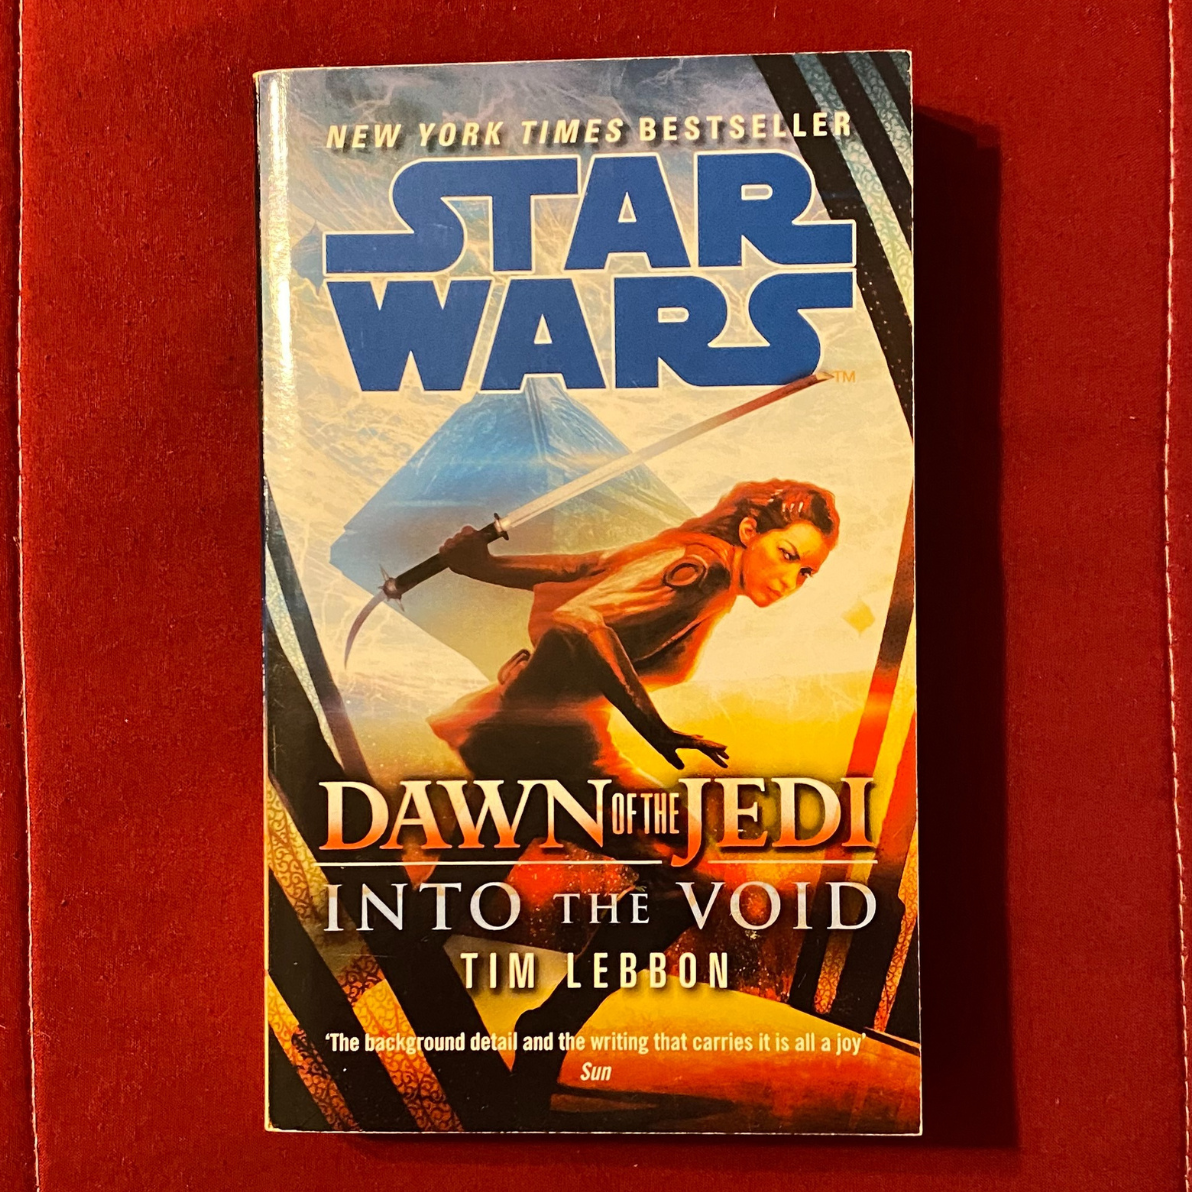 Star Wars Dawn of the Jedi: Into the Void Book Review | by Emmanuel Hale |  Medium